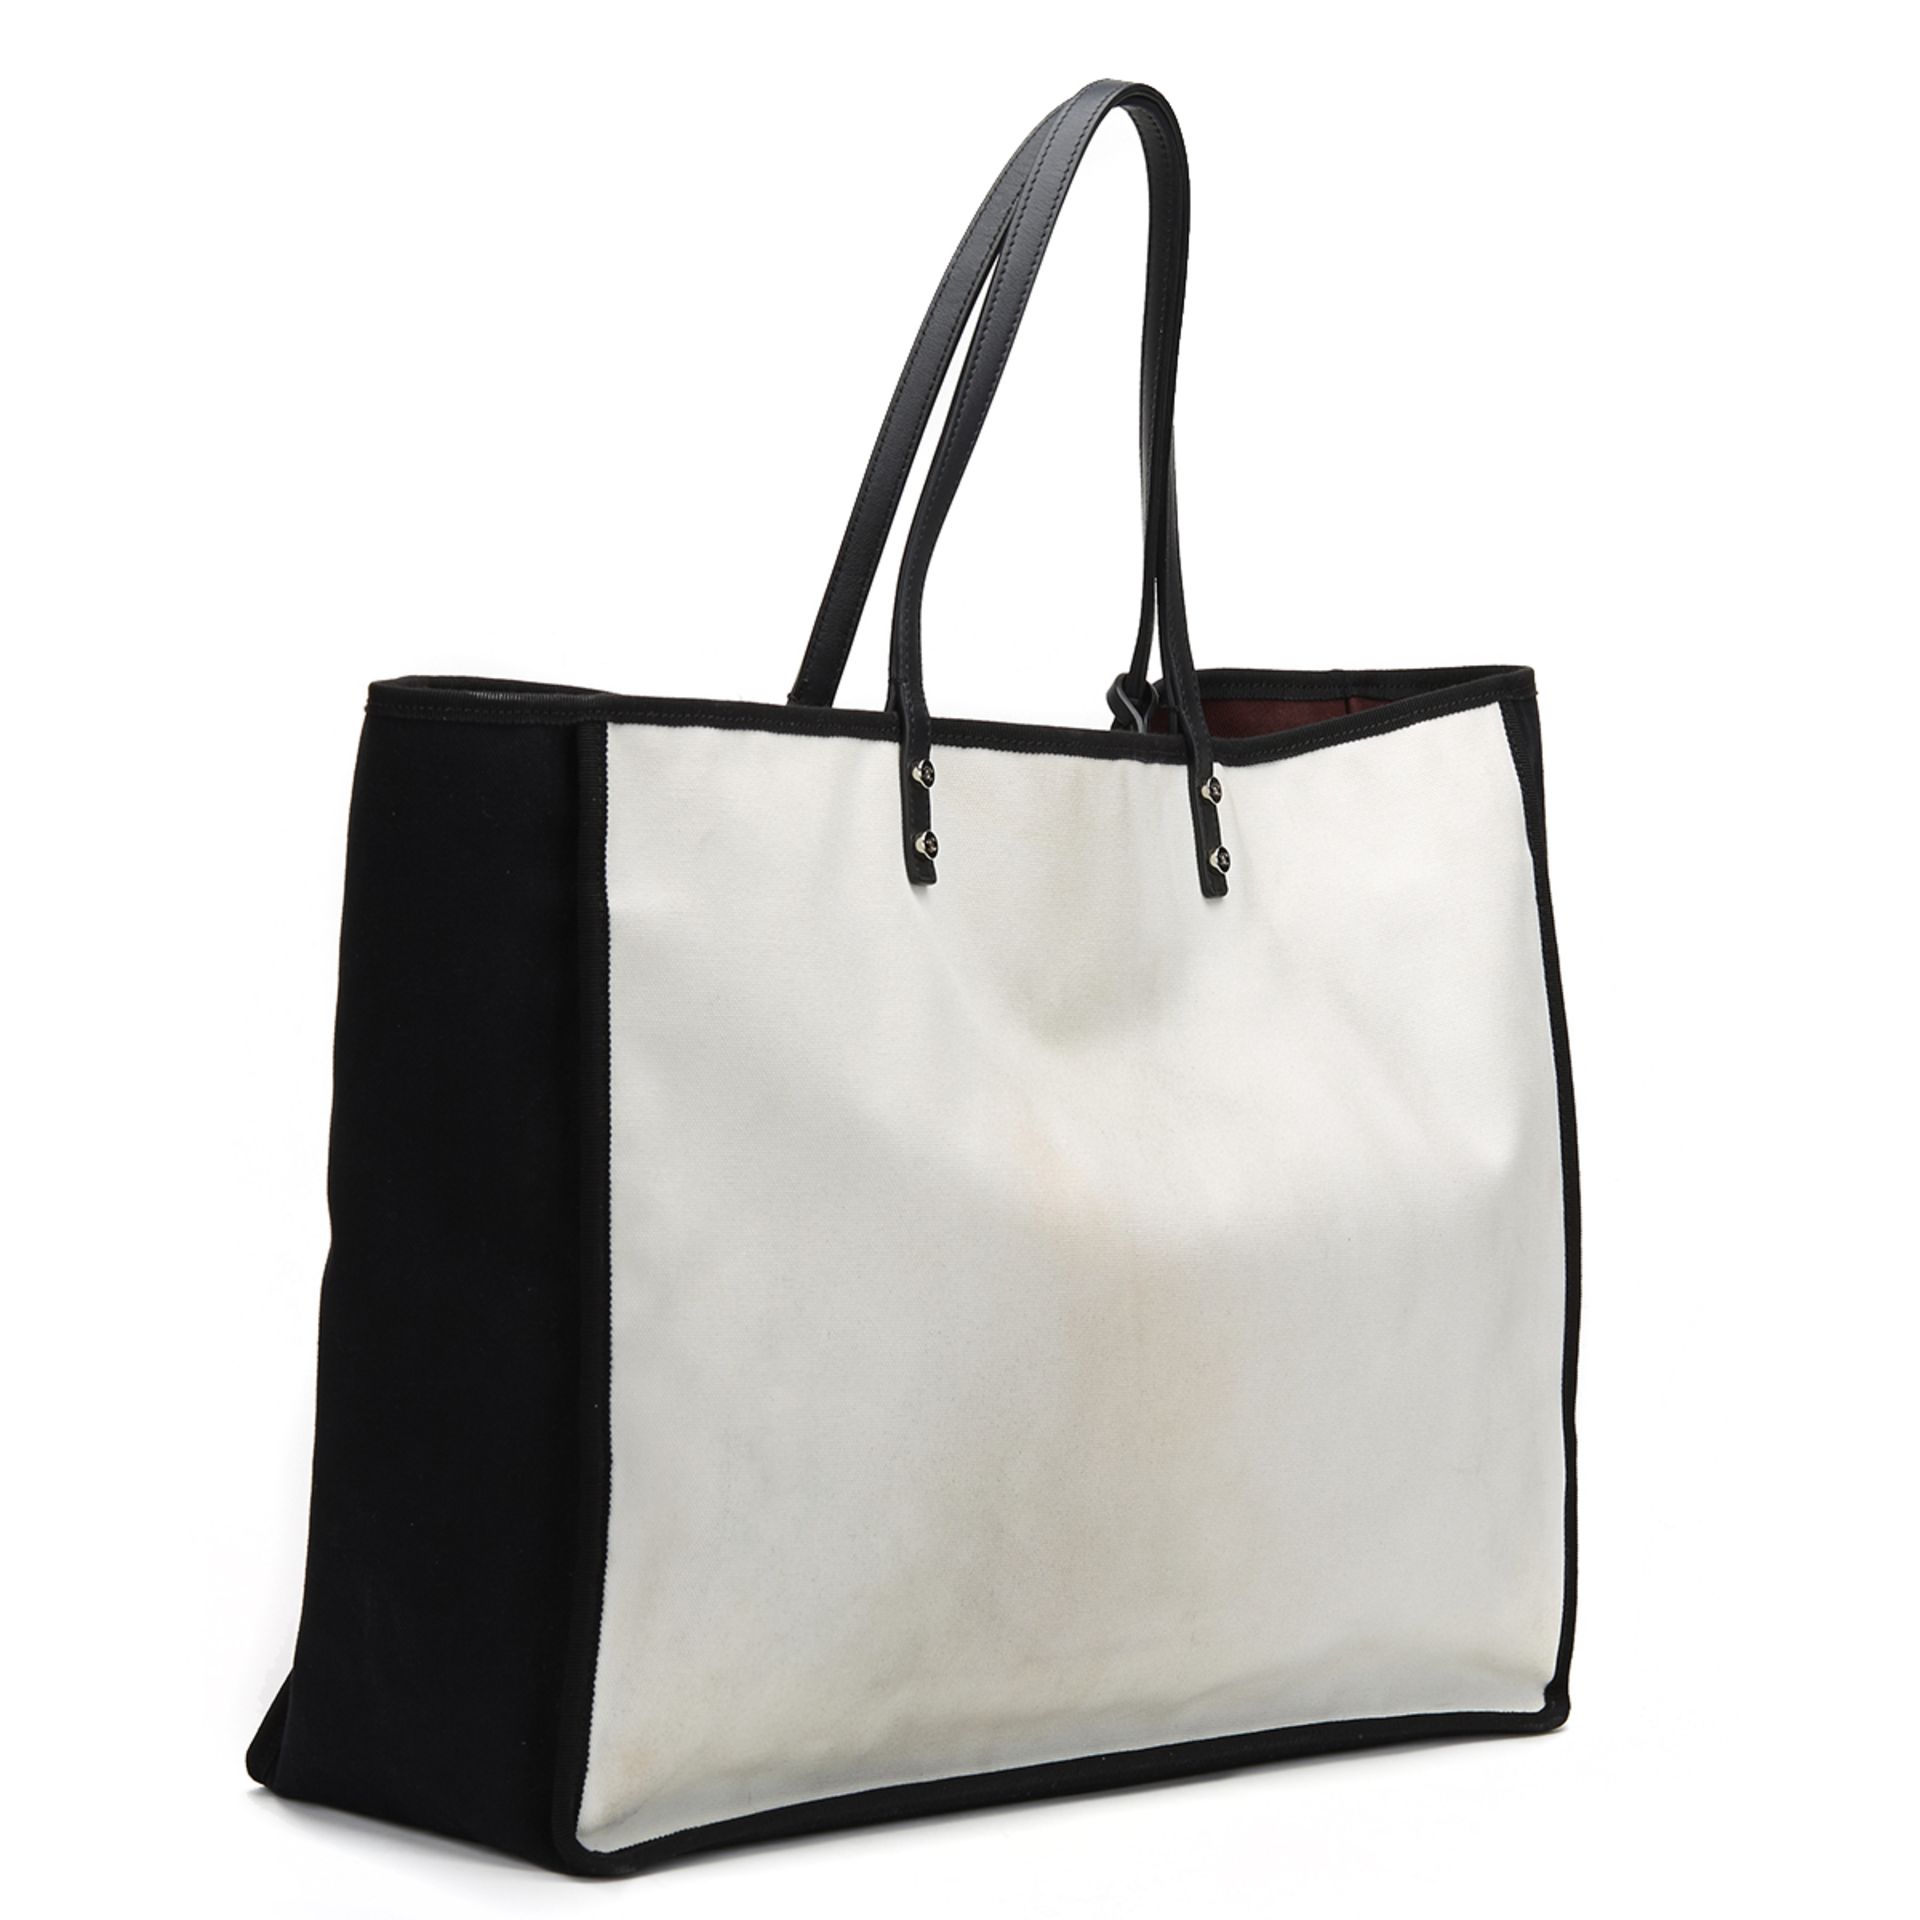 Chanel Black & White Canvas Ladies First bidper Tote - Image 4 of 9